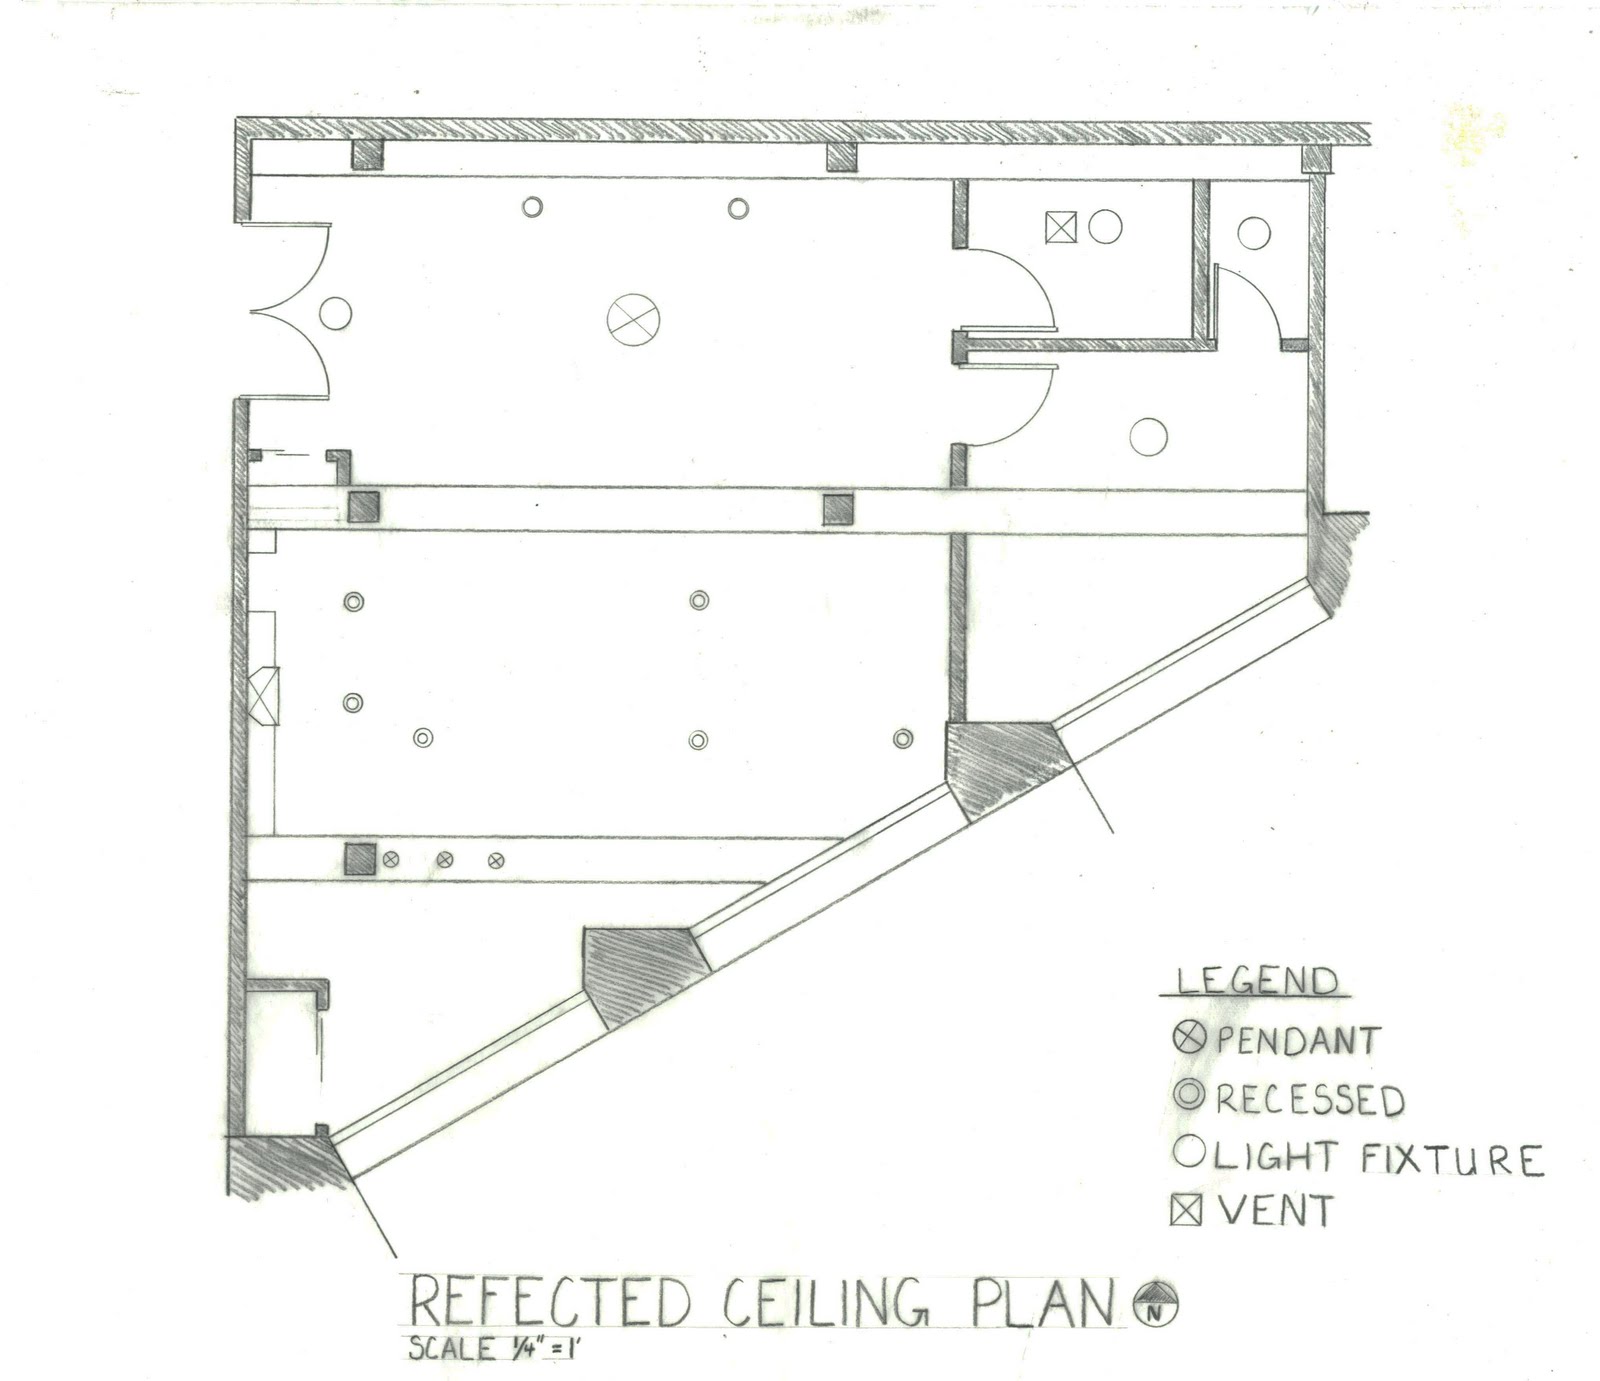 Shannon Stewart Floor Plan And Reflected Ceiling Plan